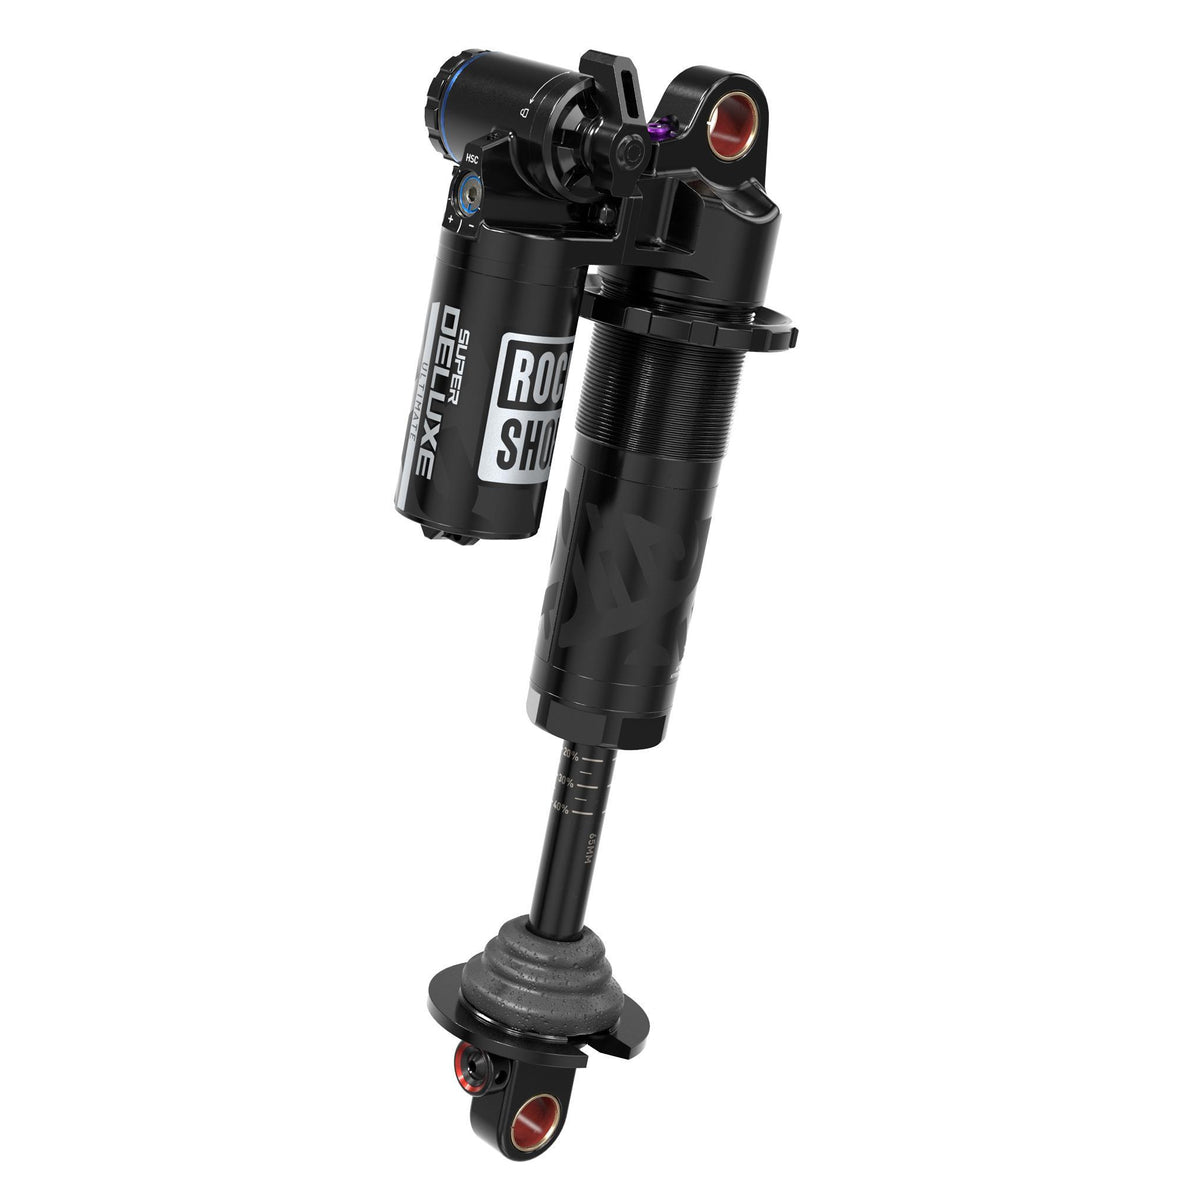 Rockshox Super Deluxe Coil Ultimate Rear Shock RC2T - Linearreb/Mcomp, 320LB Lockout, Hydraulic Bottom Out, Standard Bearing(Spring Sold Separate) B1 Santa Cruz Nomad 4 2017-2020 Black 230X60